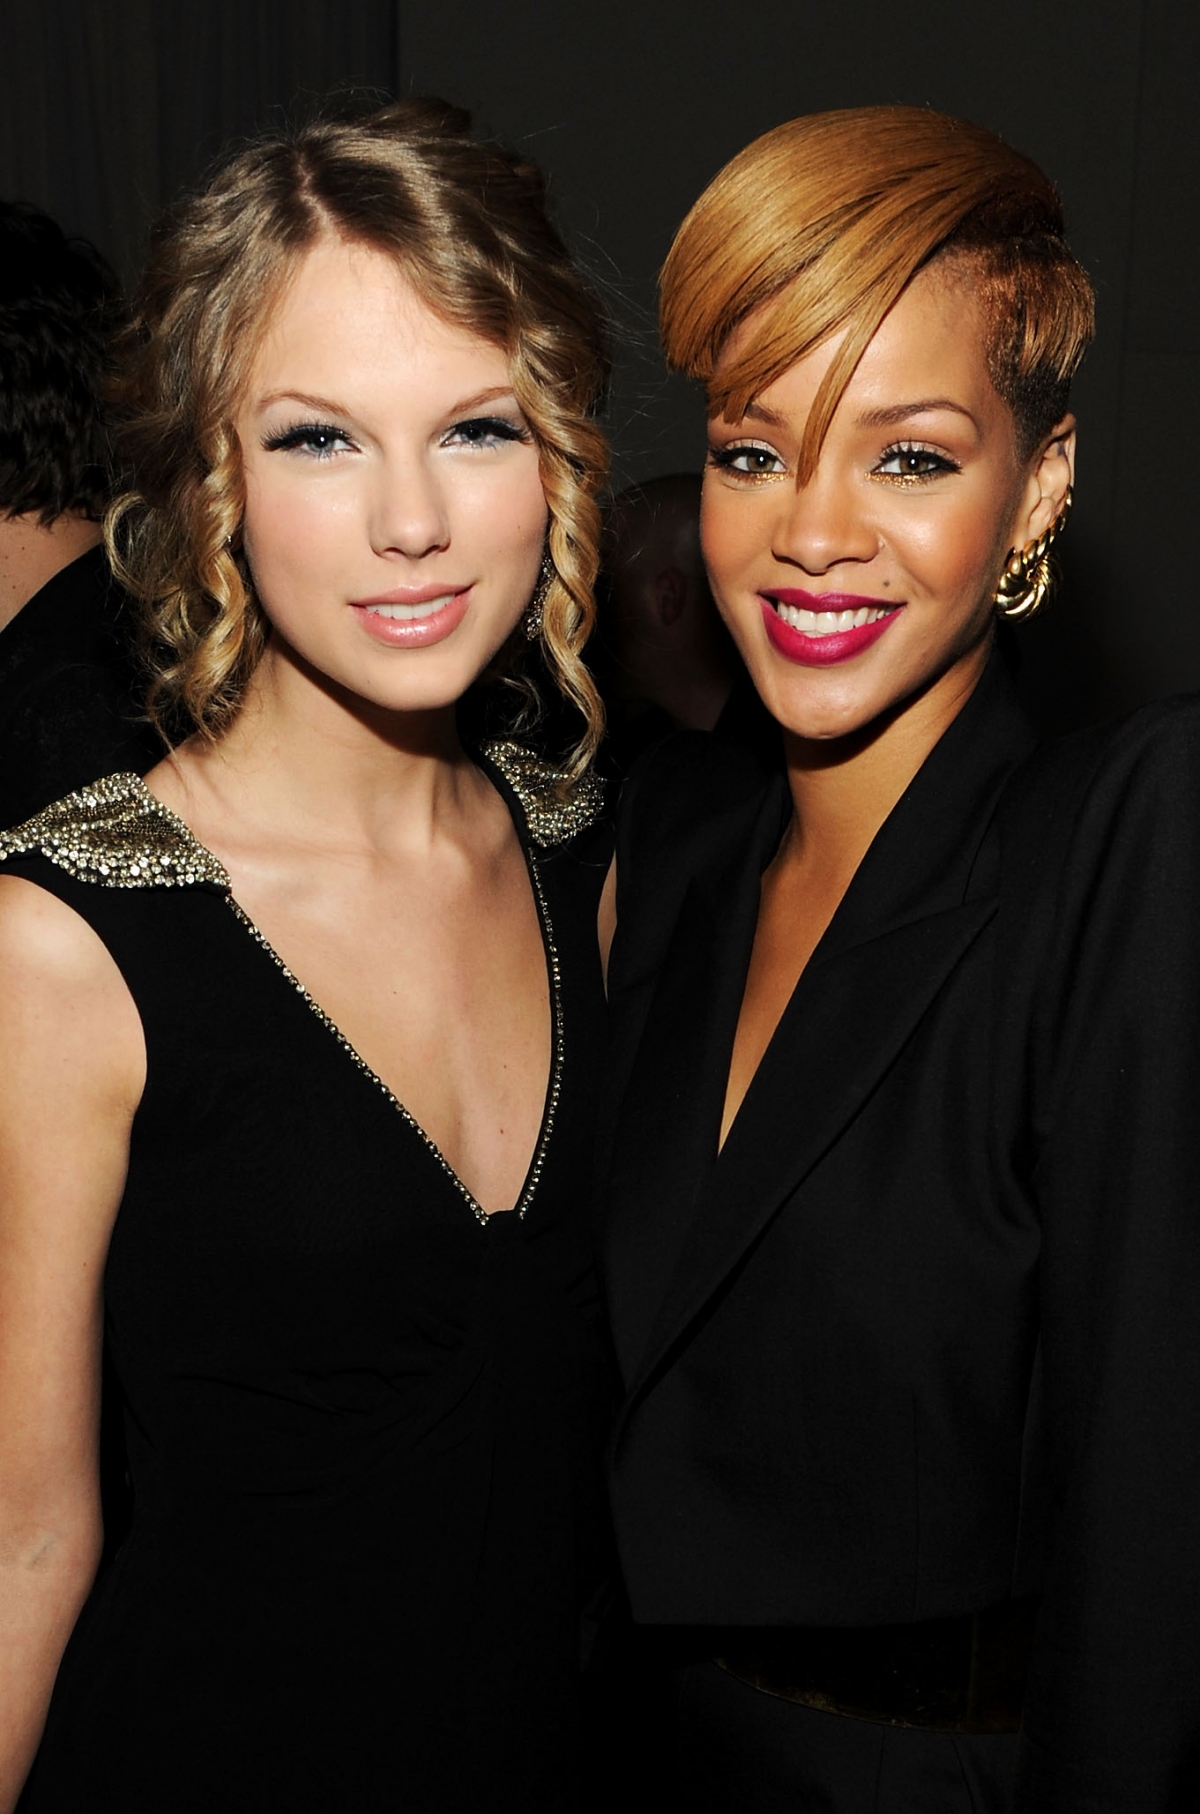 Rihanna will not join Taylor Swift on stage: Revenge for dissing Katy Perry?1200 x 1814